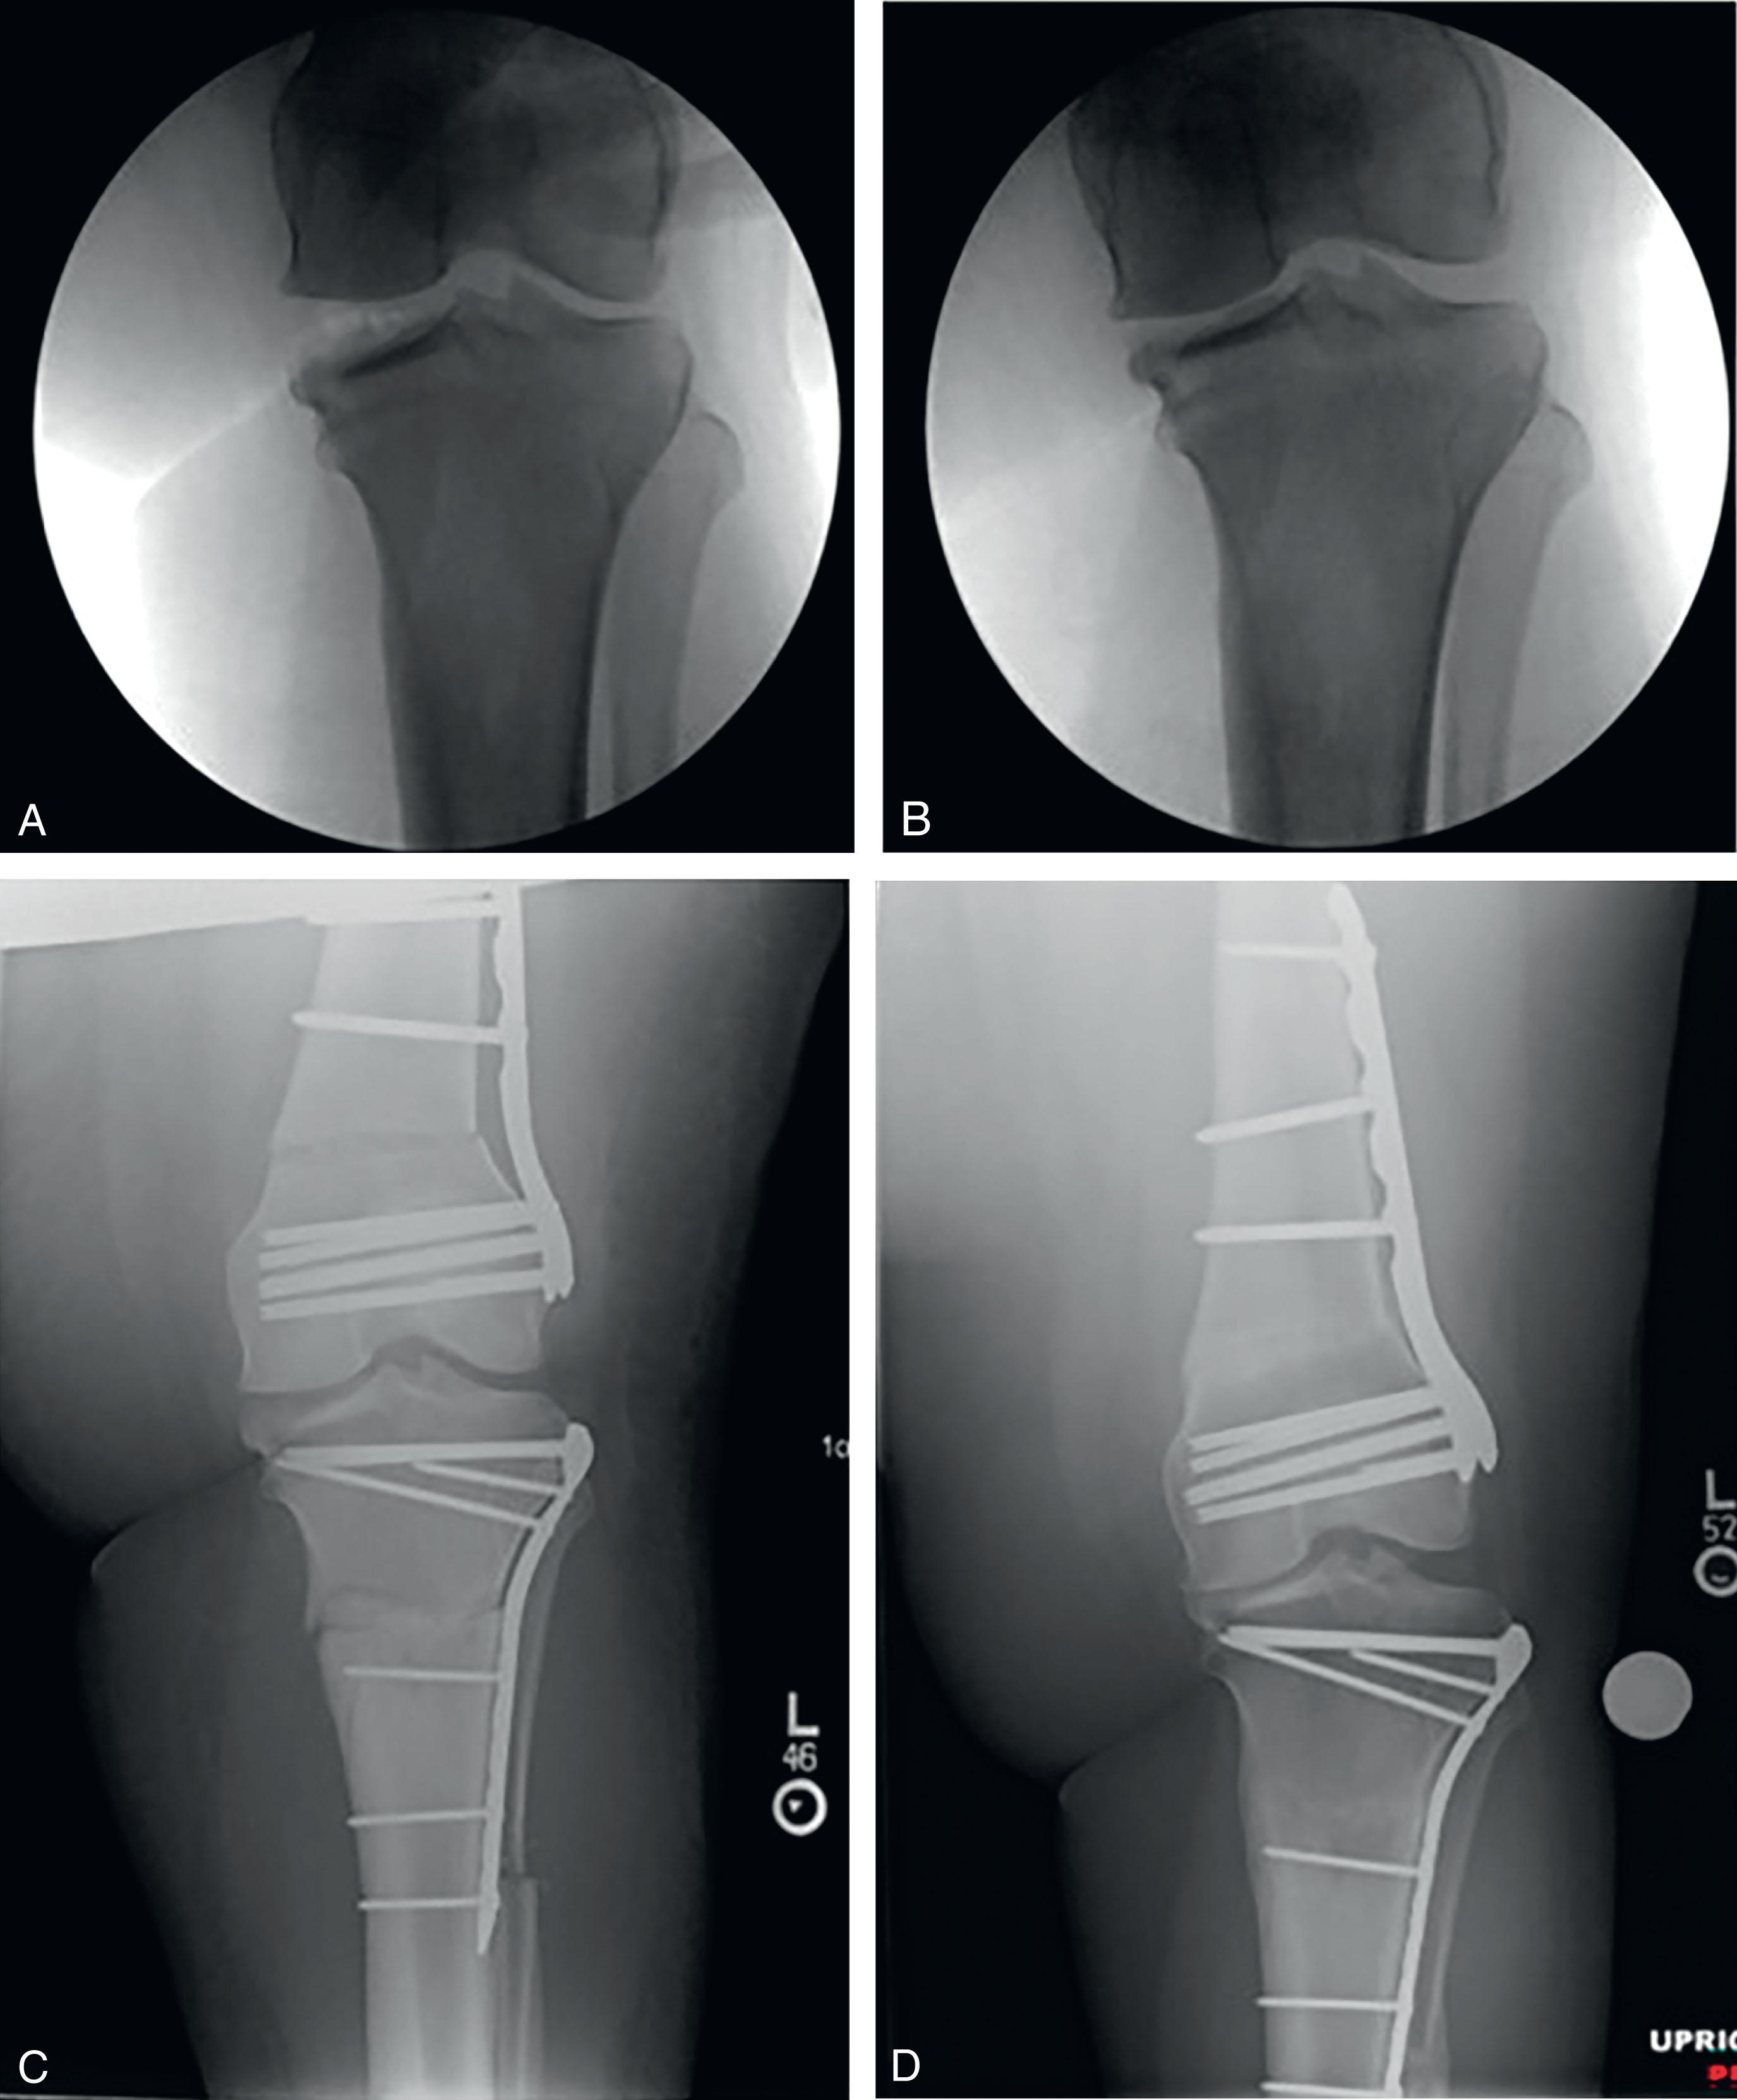 Fig. 32.1, (A and B) Intraoperative coronal plane stress exam, demonstrating fibular collateral ligament (FCL) laxity on varus stressing. (C) The surgeon planned the tibial correction based on the alignment of the tibial plateau and did not incorporate the degree of FCL laxity. Immediate postoperative radiograph demonstrates satisfactory alignment of the distal femur and proximal tibia acute corrections. (D) At 2 years postsurgery, the varus laxity has now resulted in recurrent genu varum with increased joint line convergence.